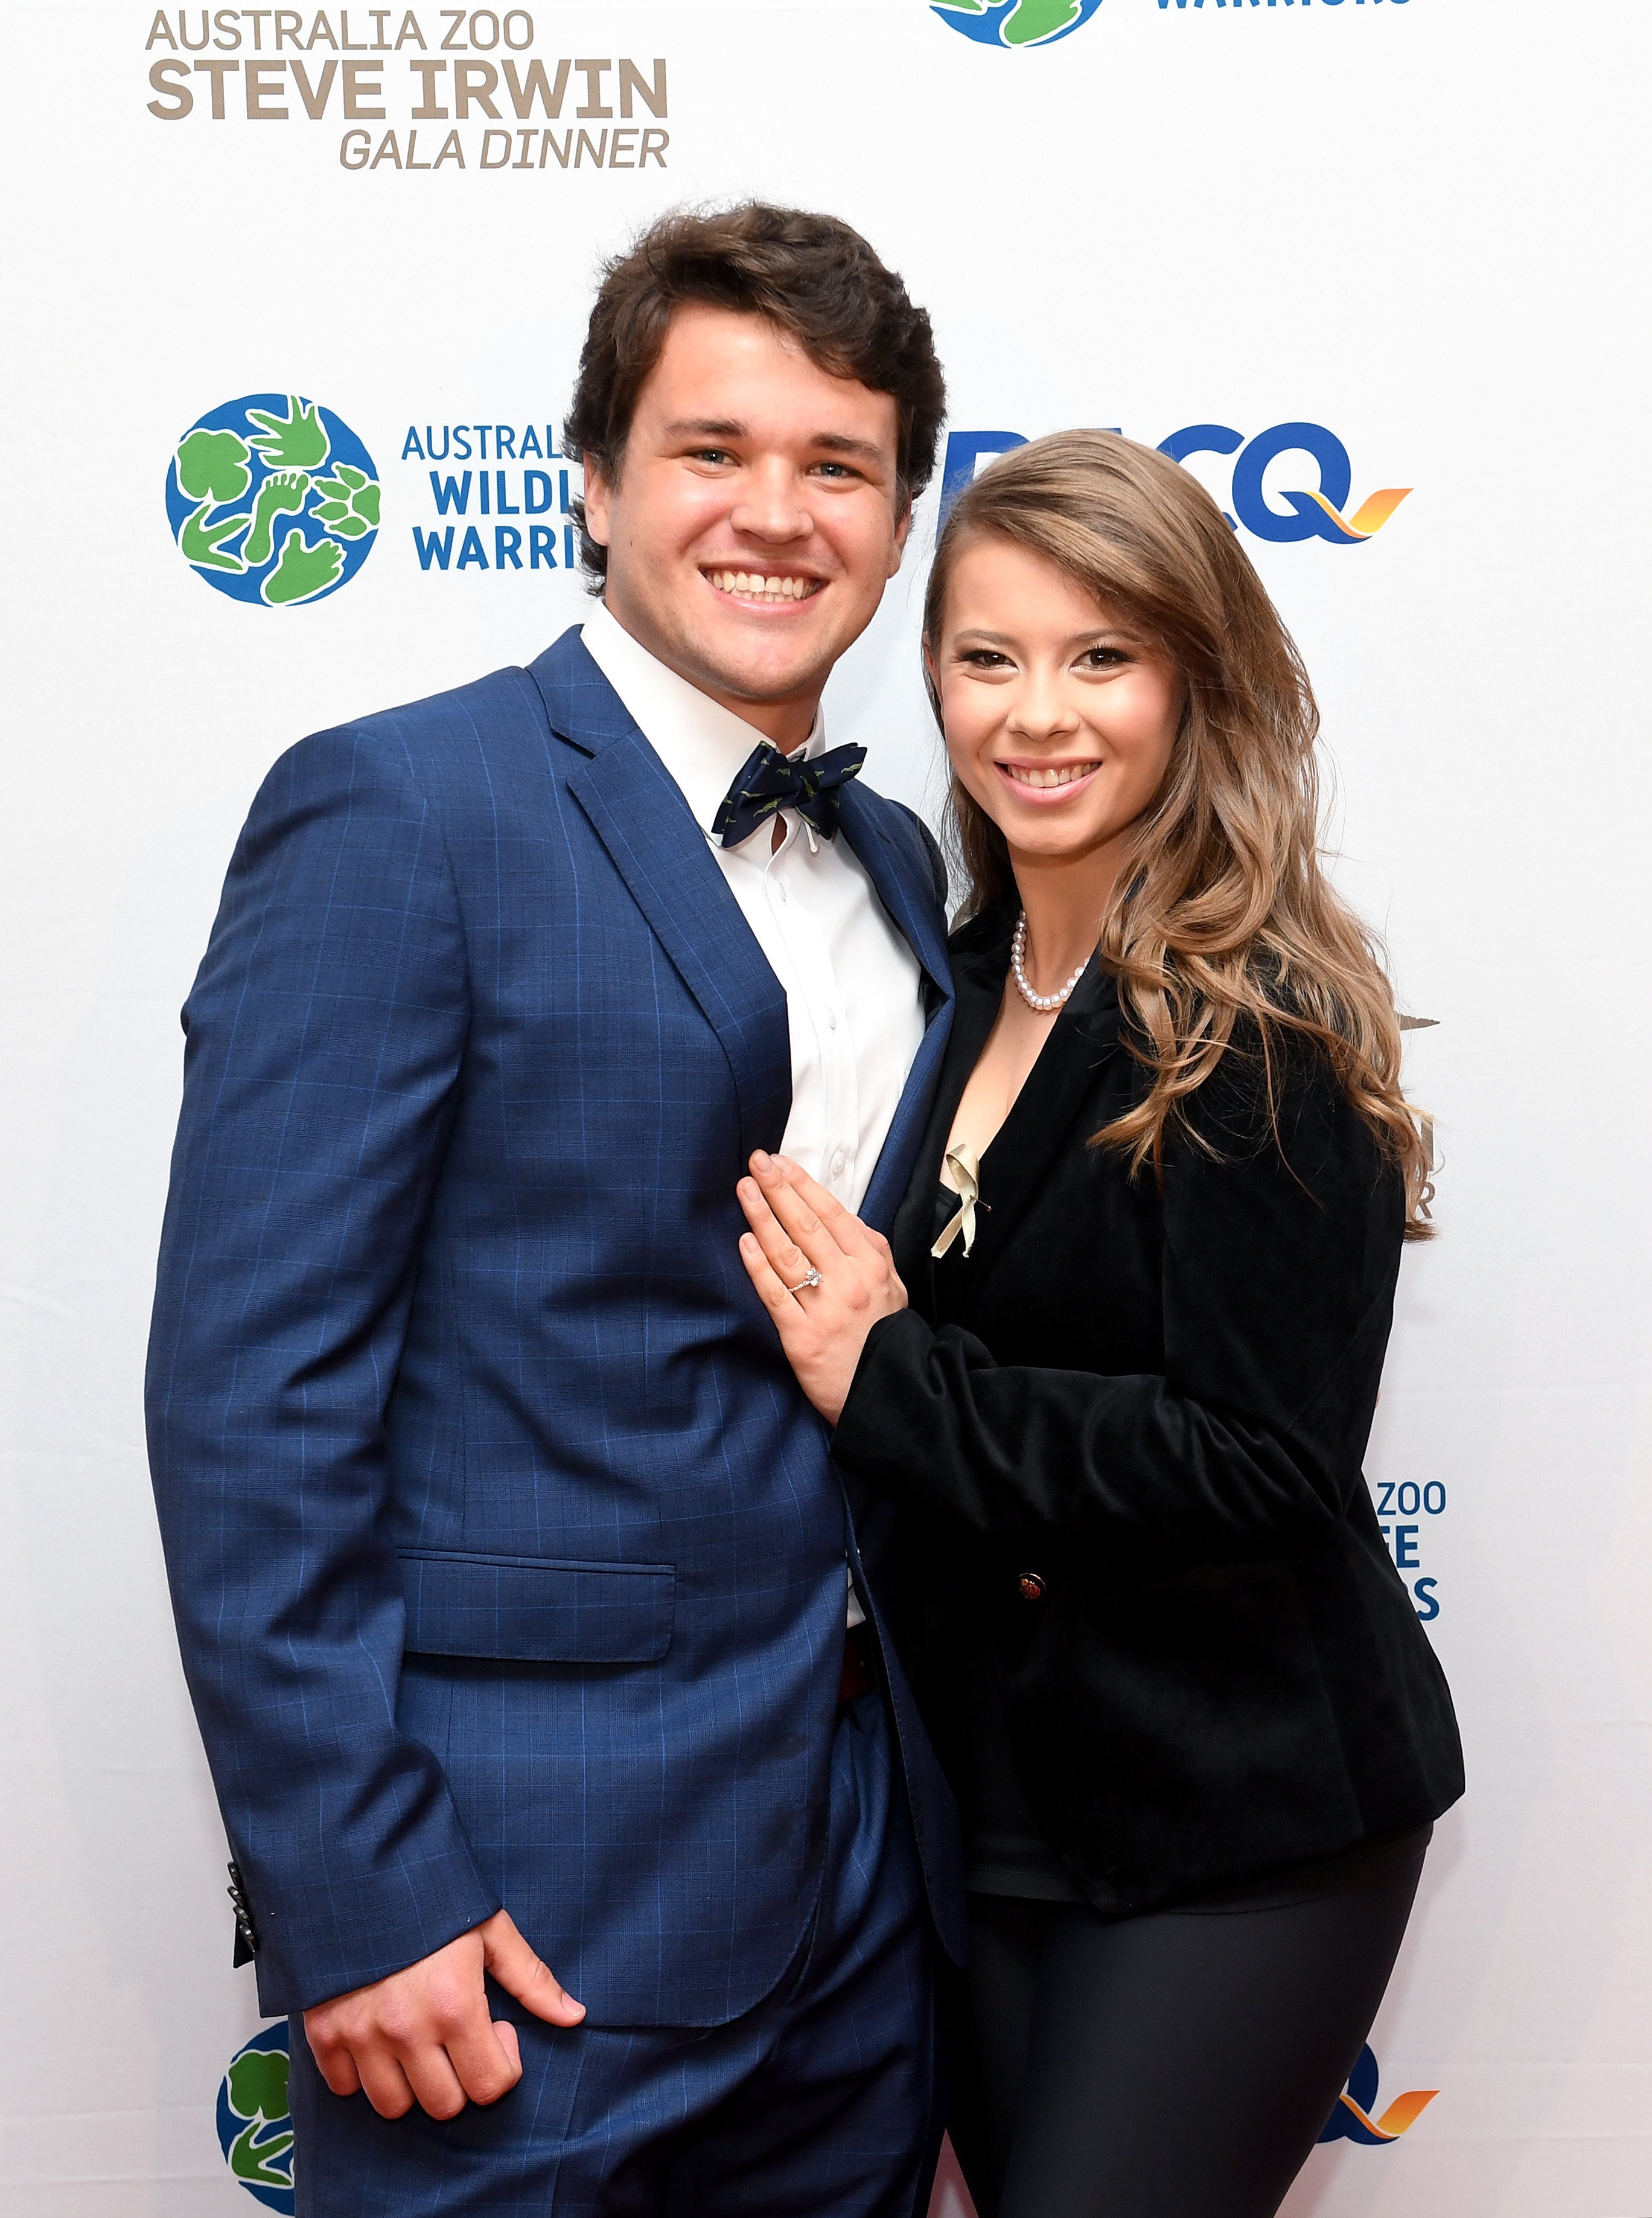 Bindi Irwin  with now-husband Chandler Powell at the annual Steve Irwin Gala Dinner at Brisbane Convention & Exhibition Centre on November 09, 2019 in Brisbane, Australia. | Source: Getty Images